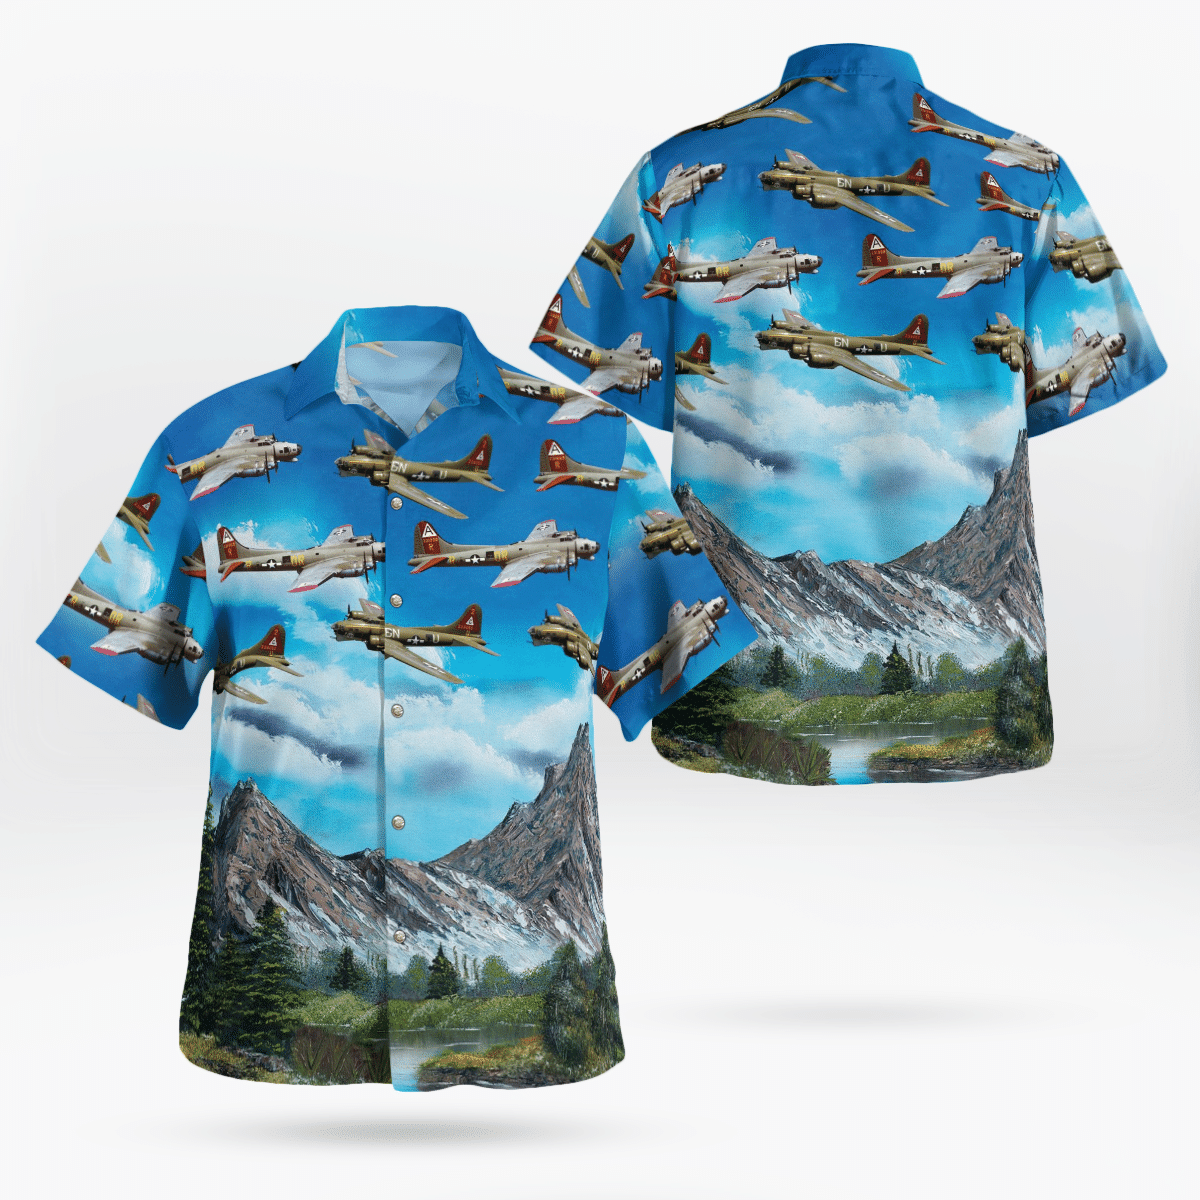 Shop now to find the perfect Hawaii Shirt for your hobby 72